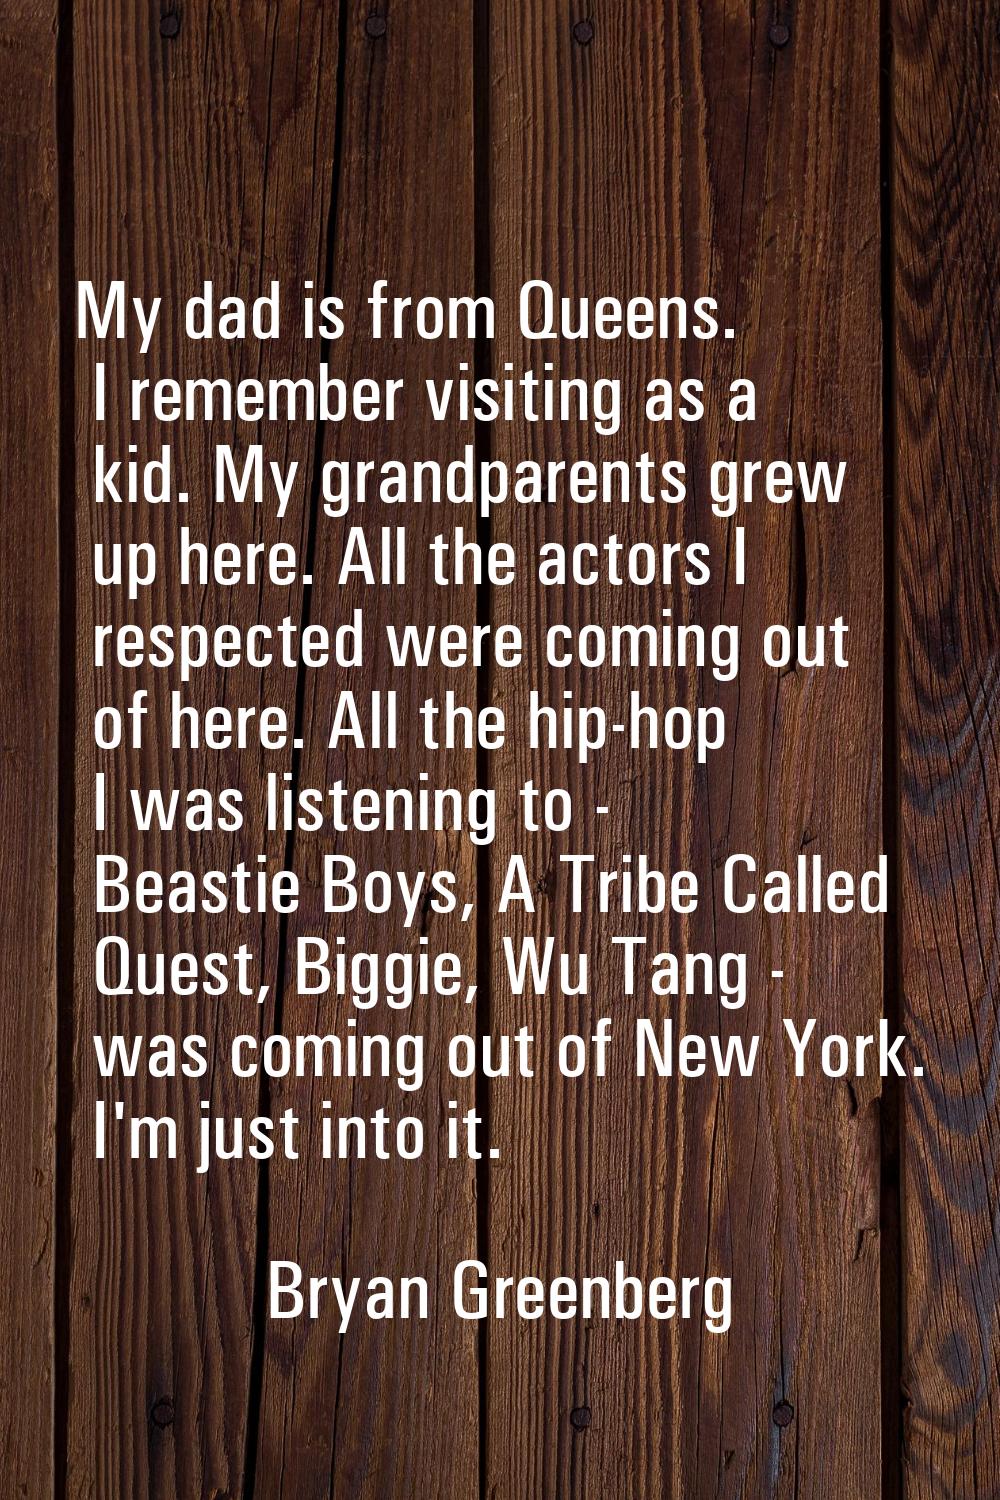 My dad is from Queens. I remember visiting as a kid. My grandparents grew up here. All the actors I